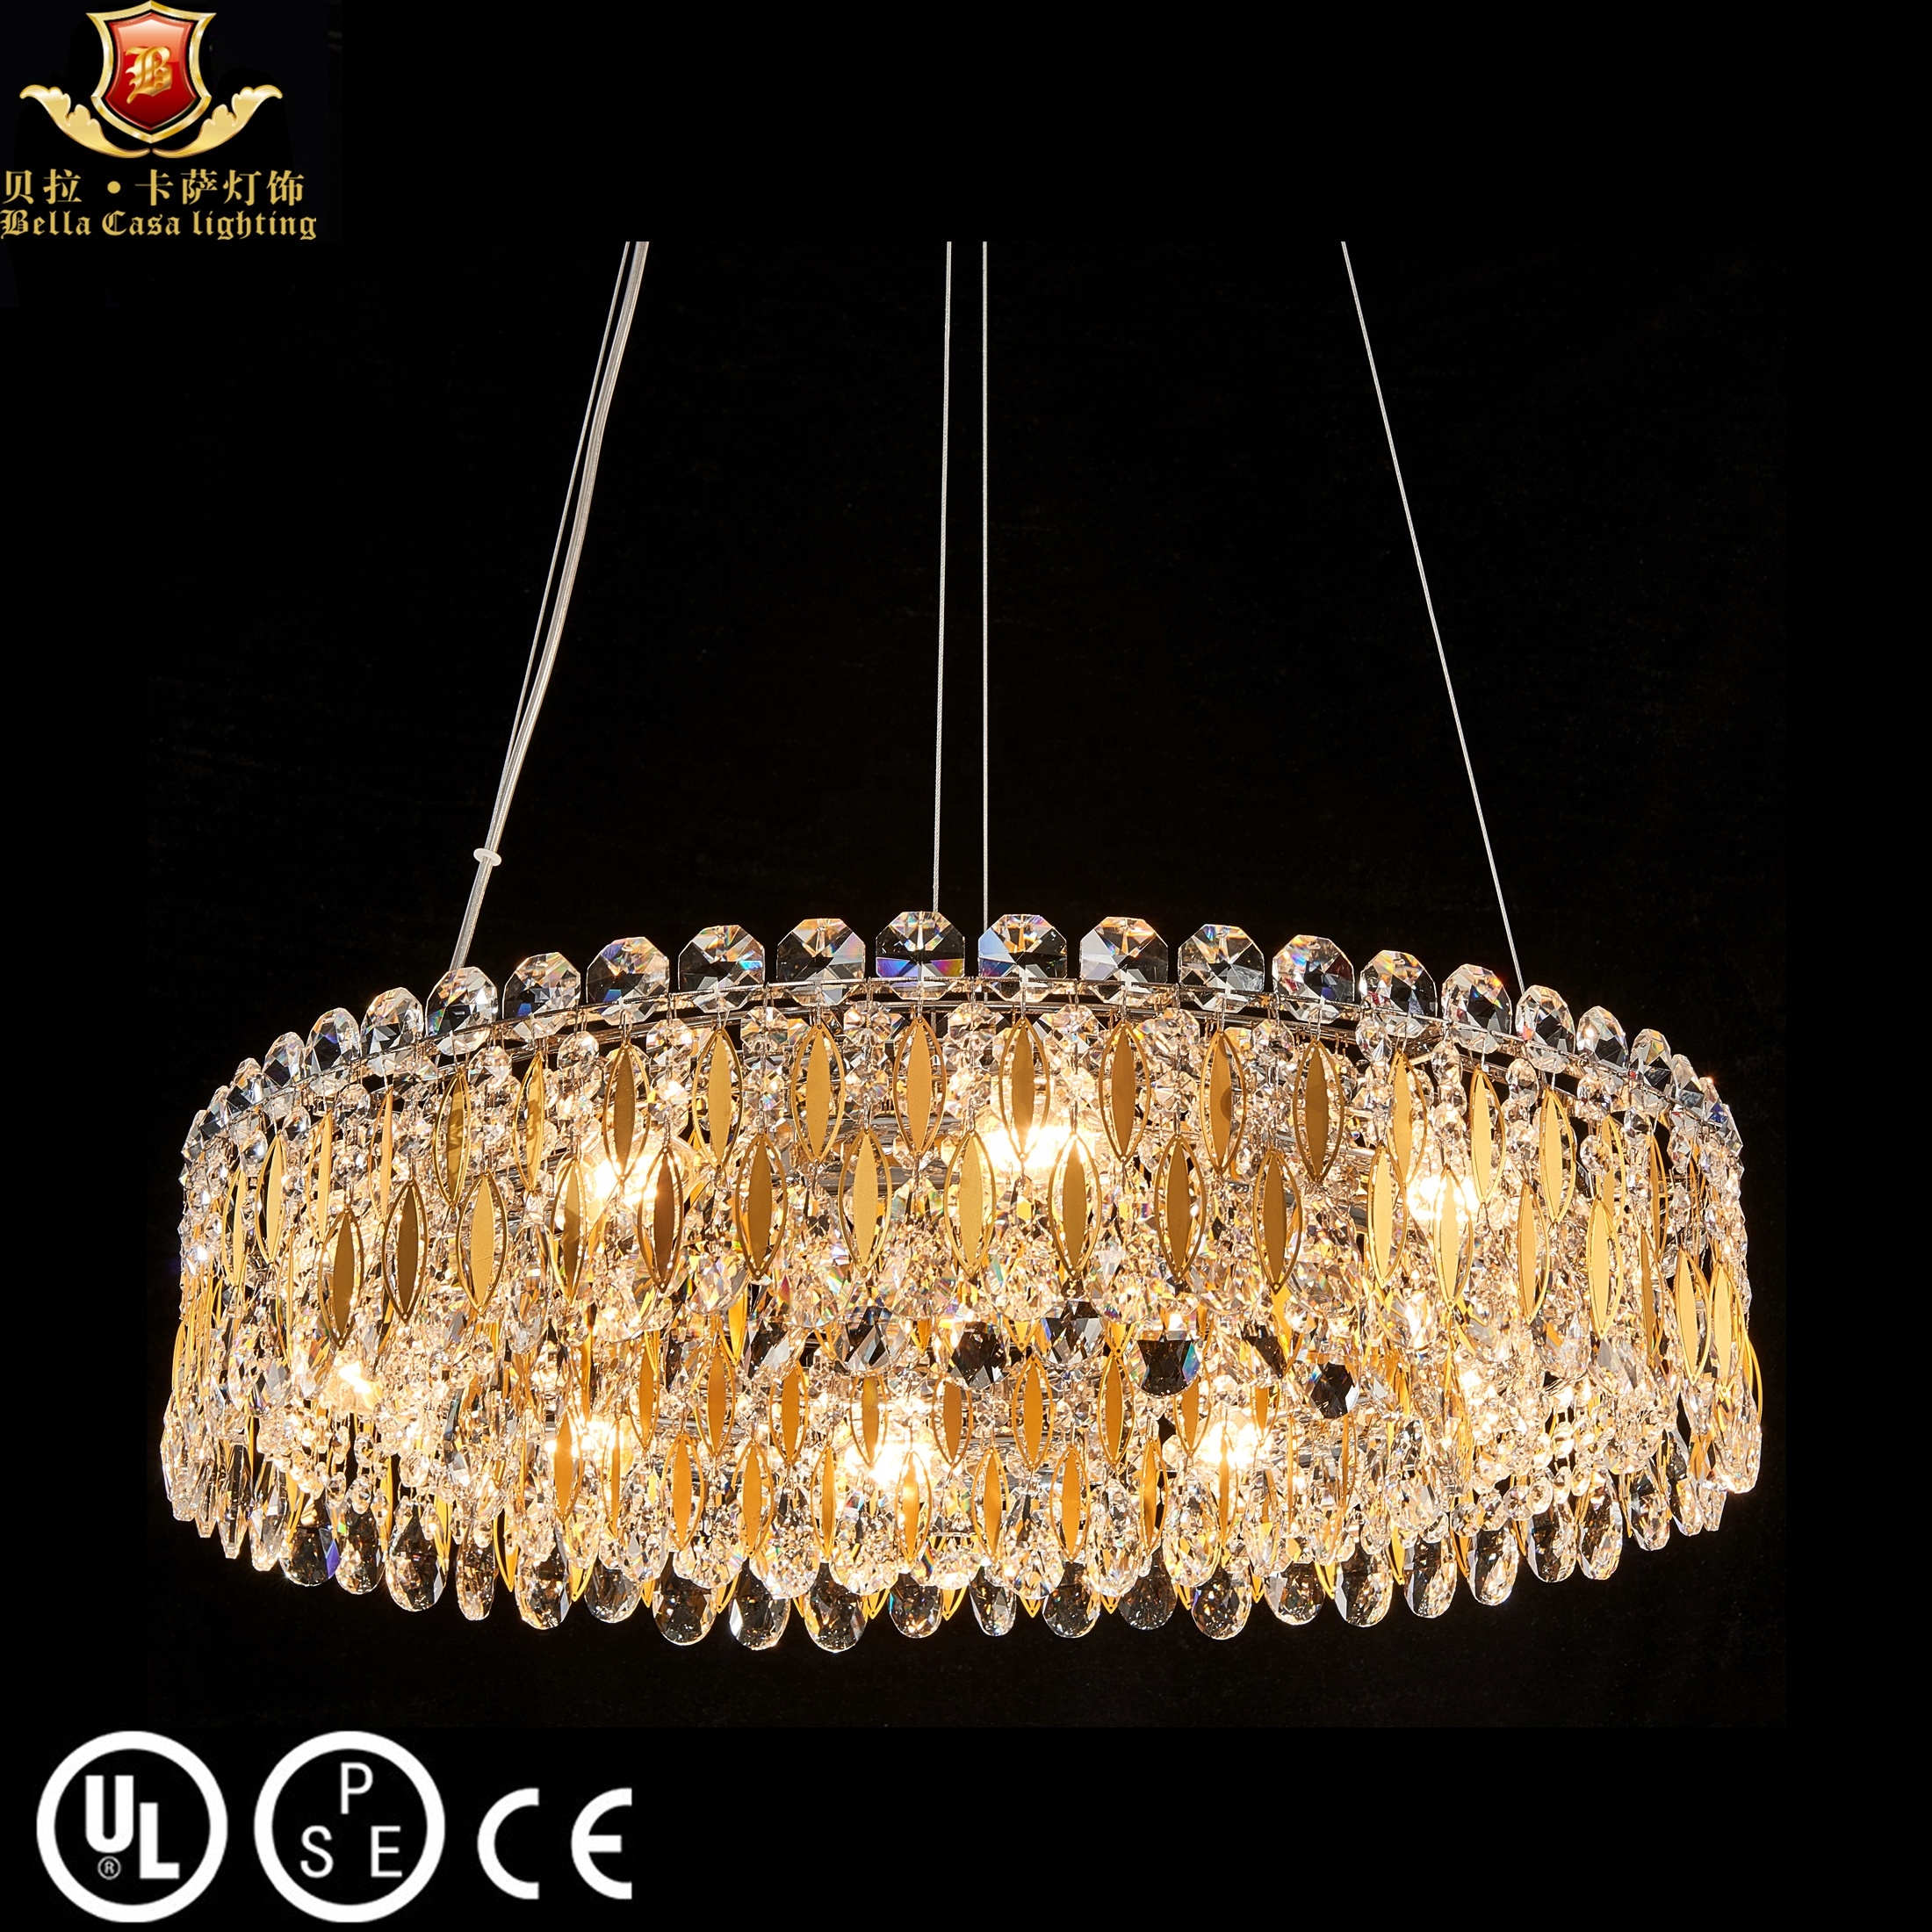 High performance customized luxury hotel crystal chandelier for dining room